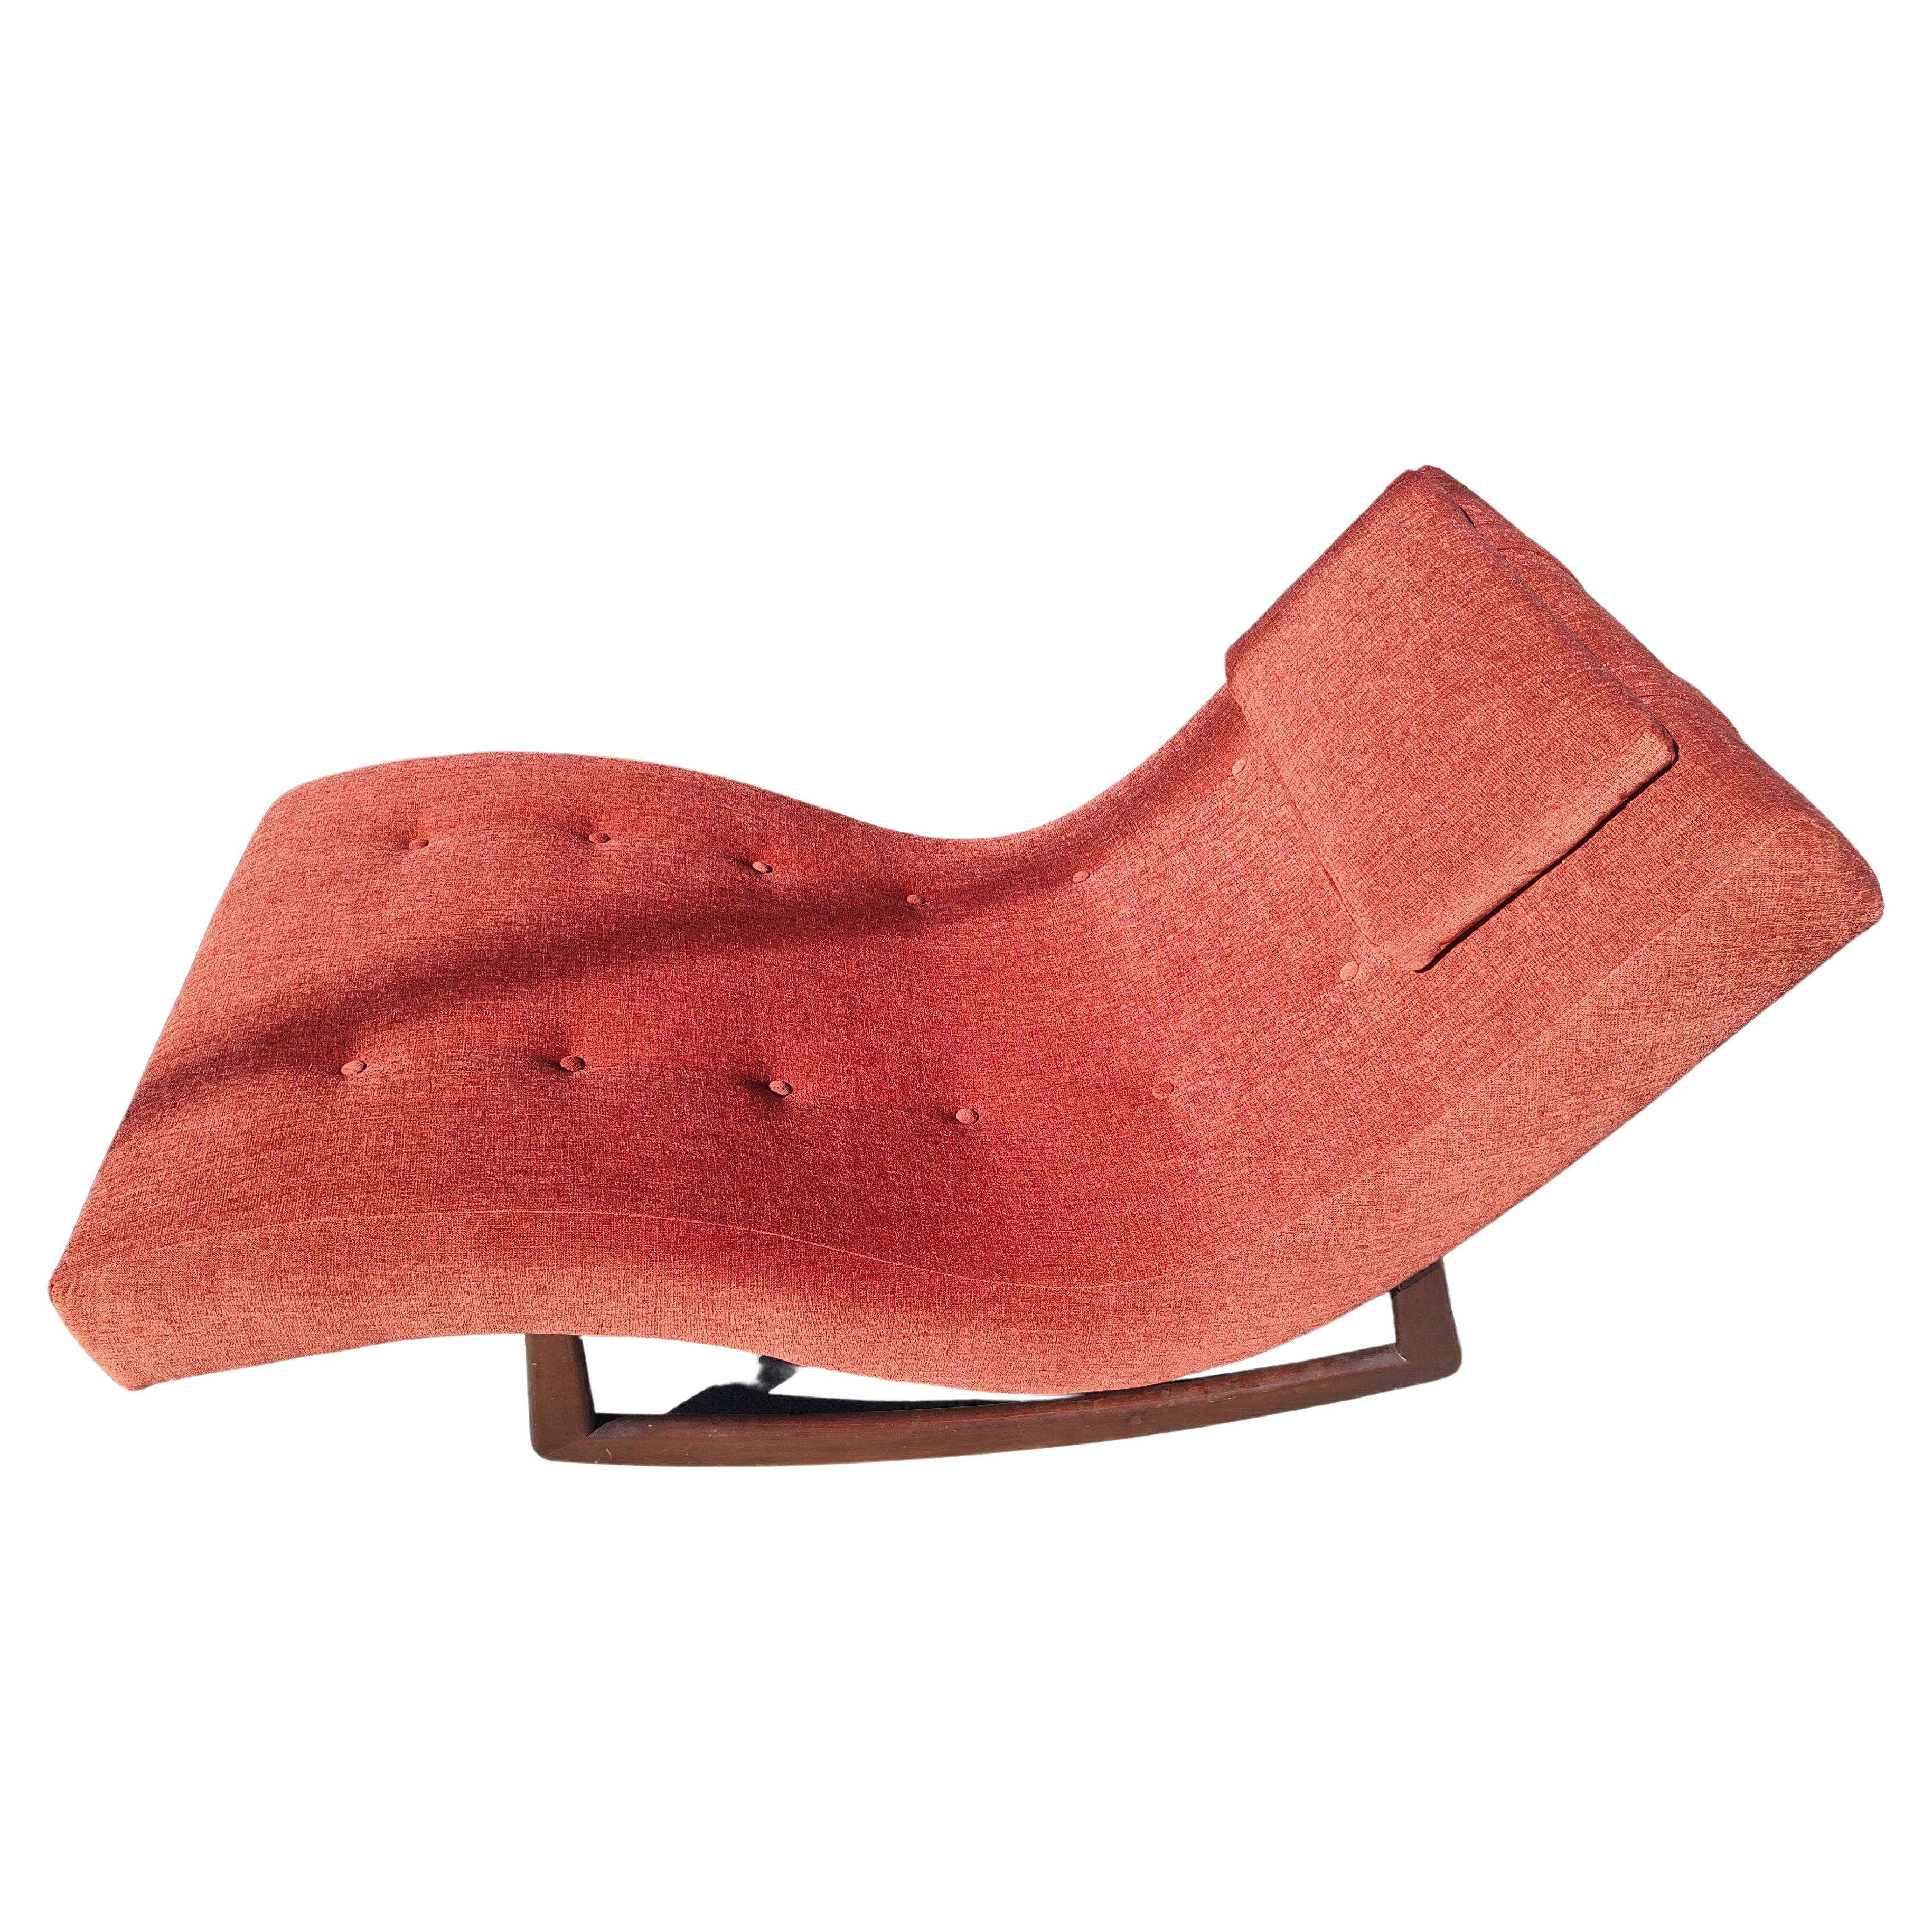 Mid Century Modern Sculptural Wave Chaise Lounge Rocker by Adrian Pearsall C1960 In Good Condition For Sale In Port Jervis, NY